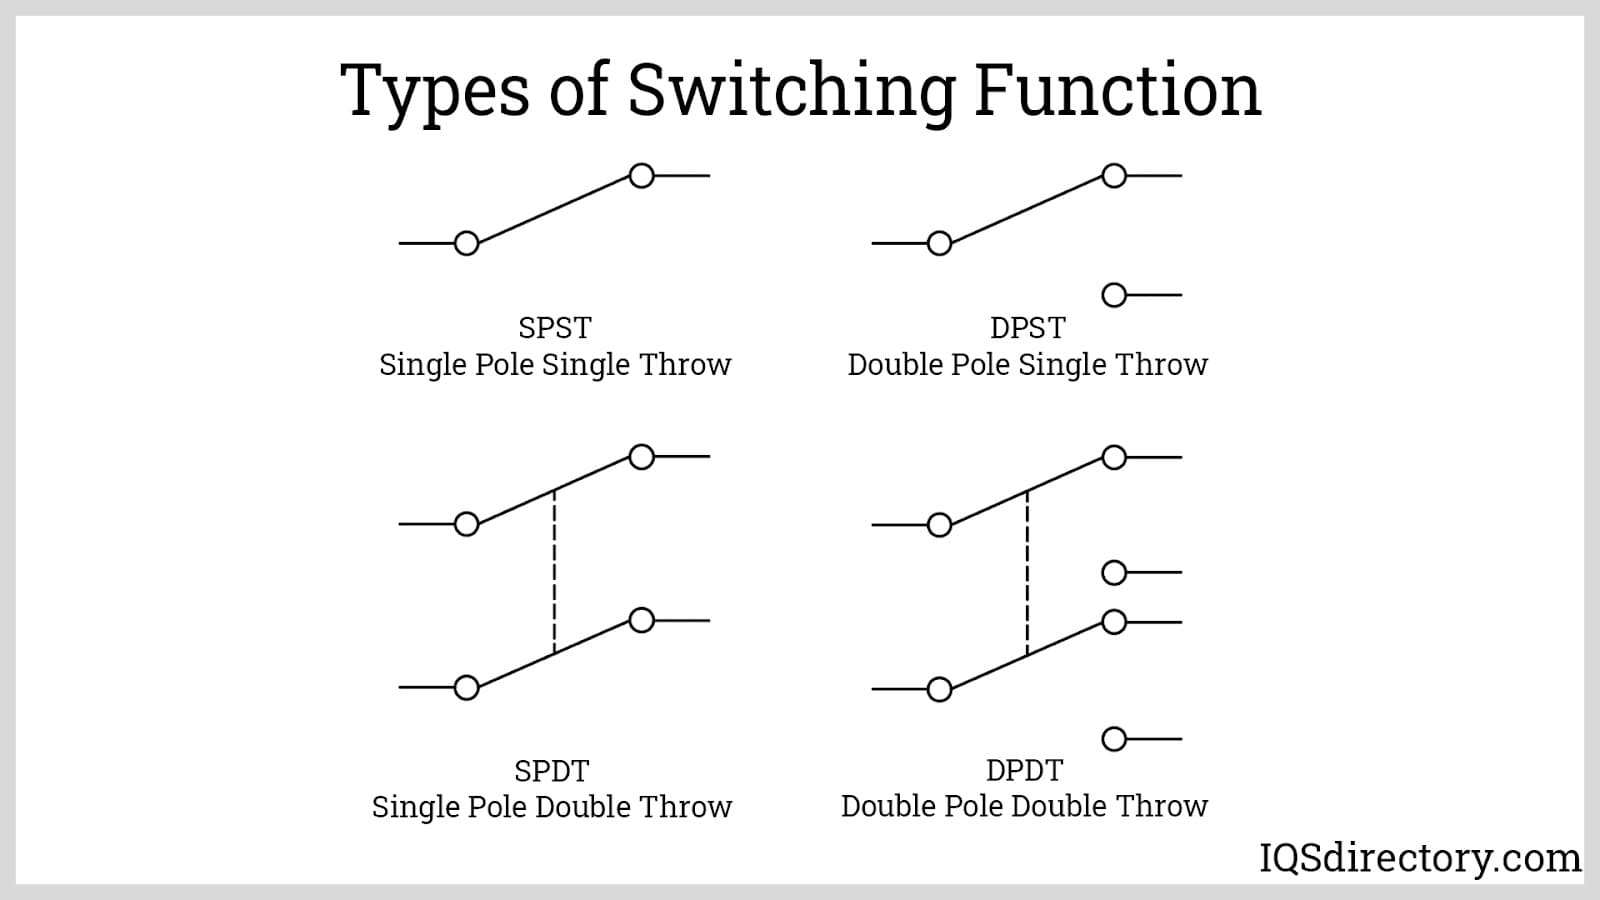 Types of Switching Function